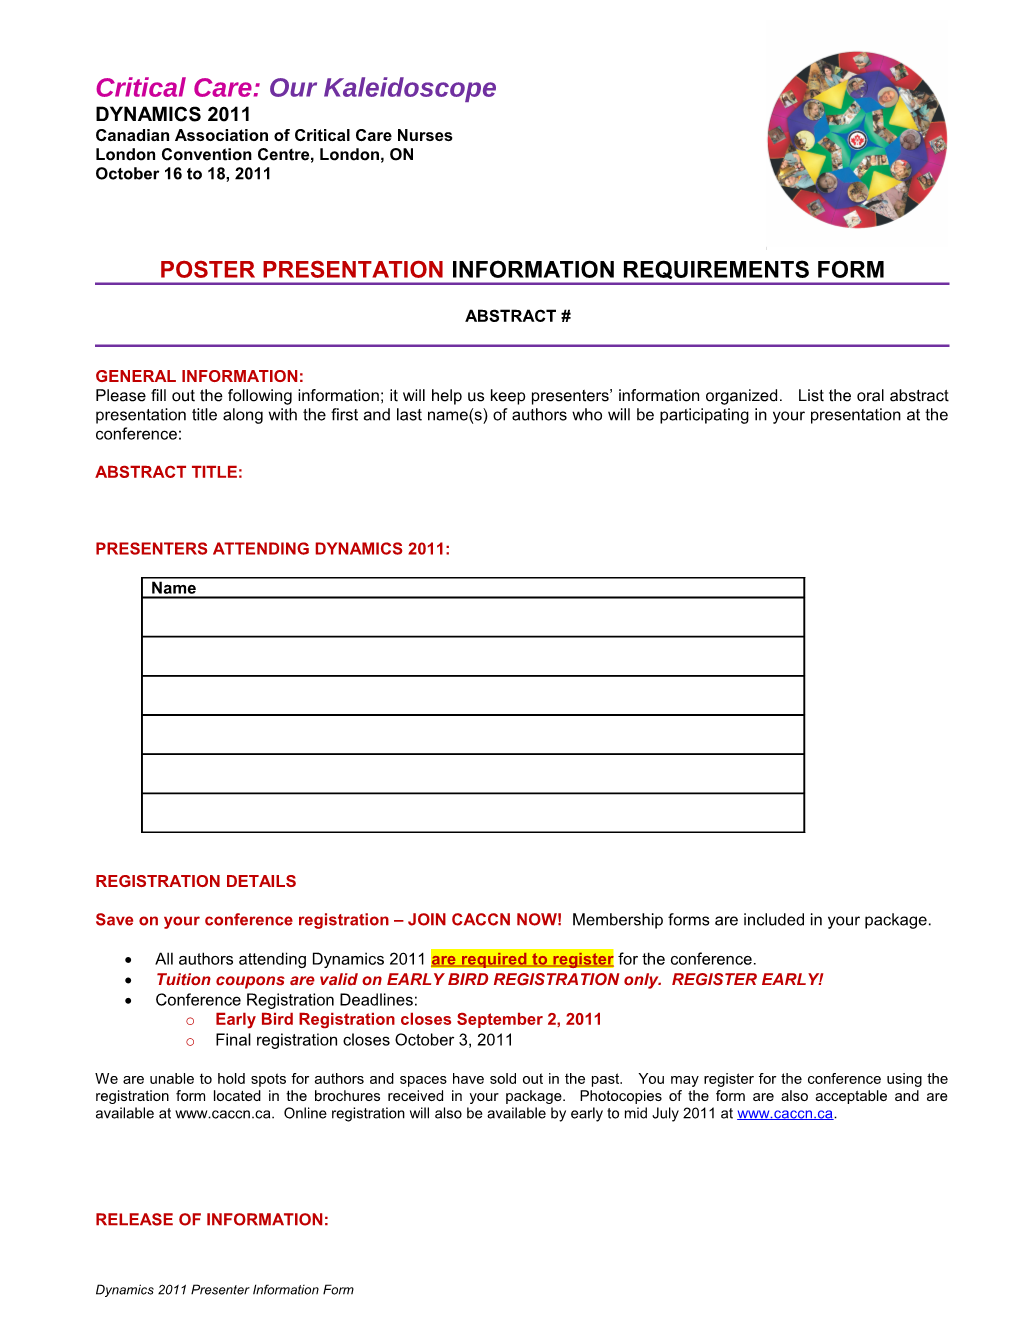 Poster Presentation Information Requirements Form